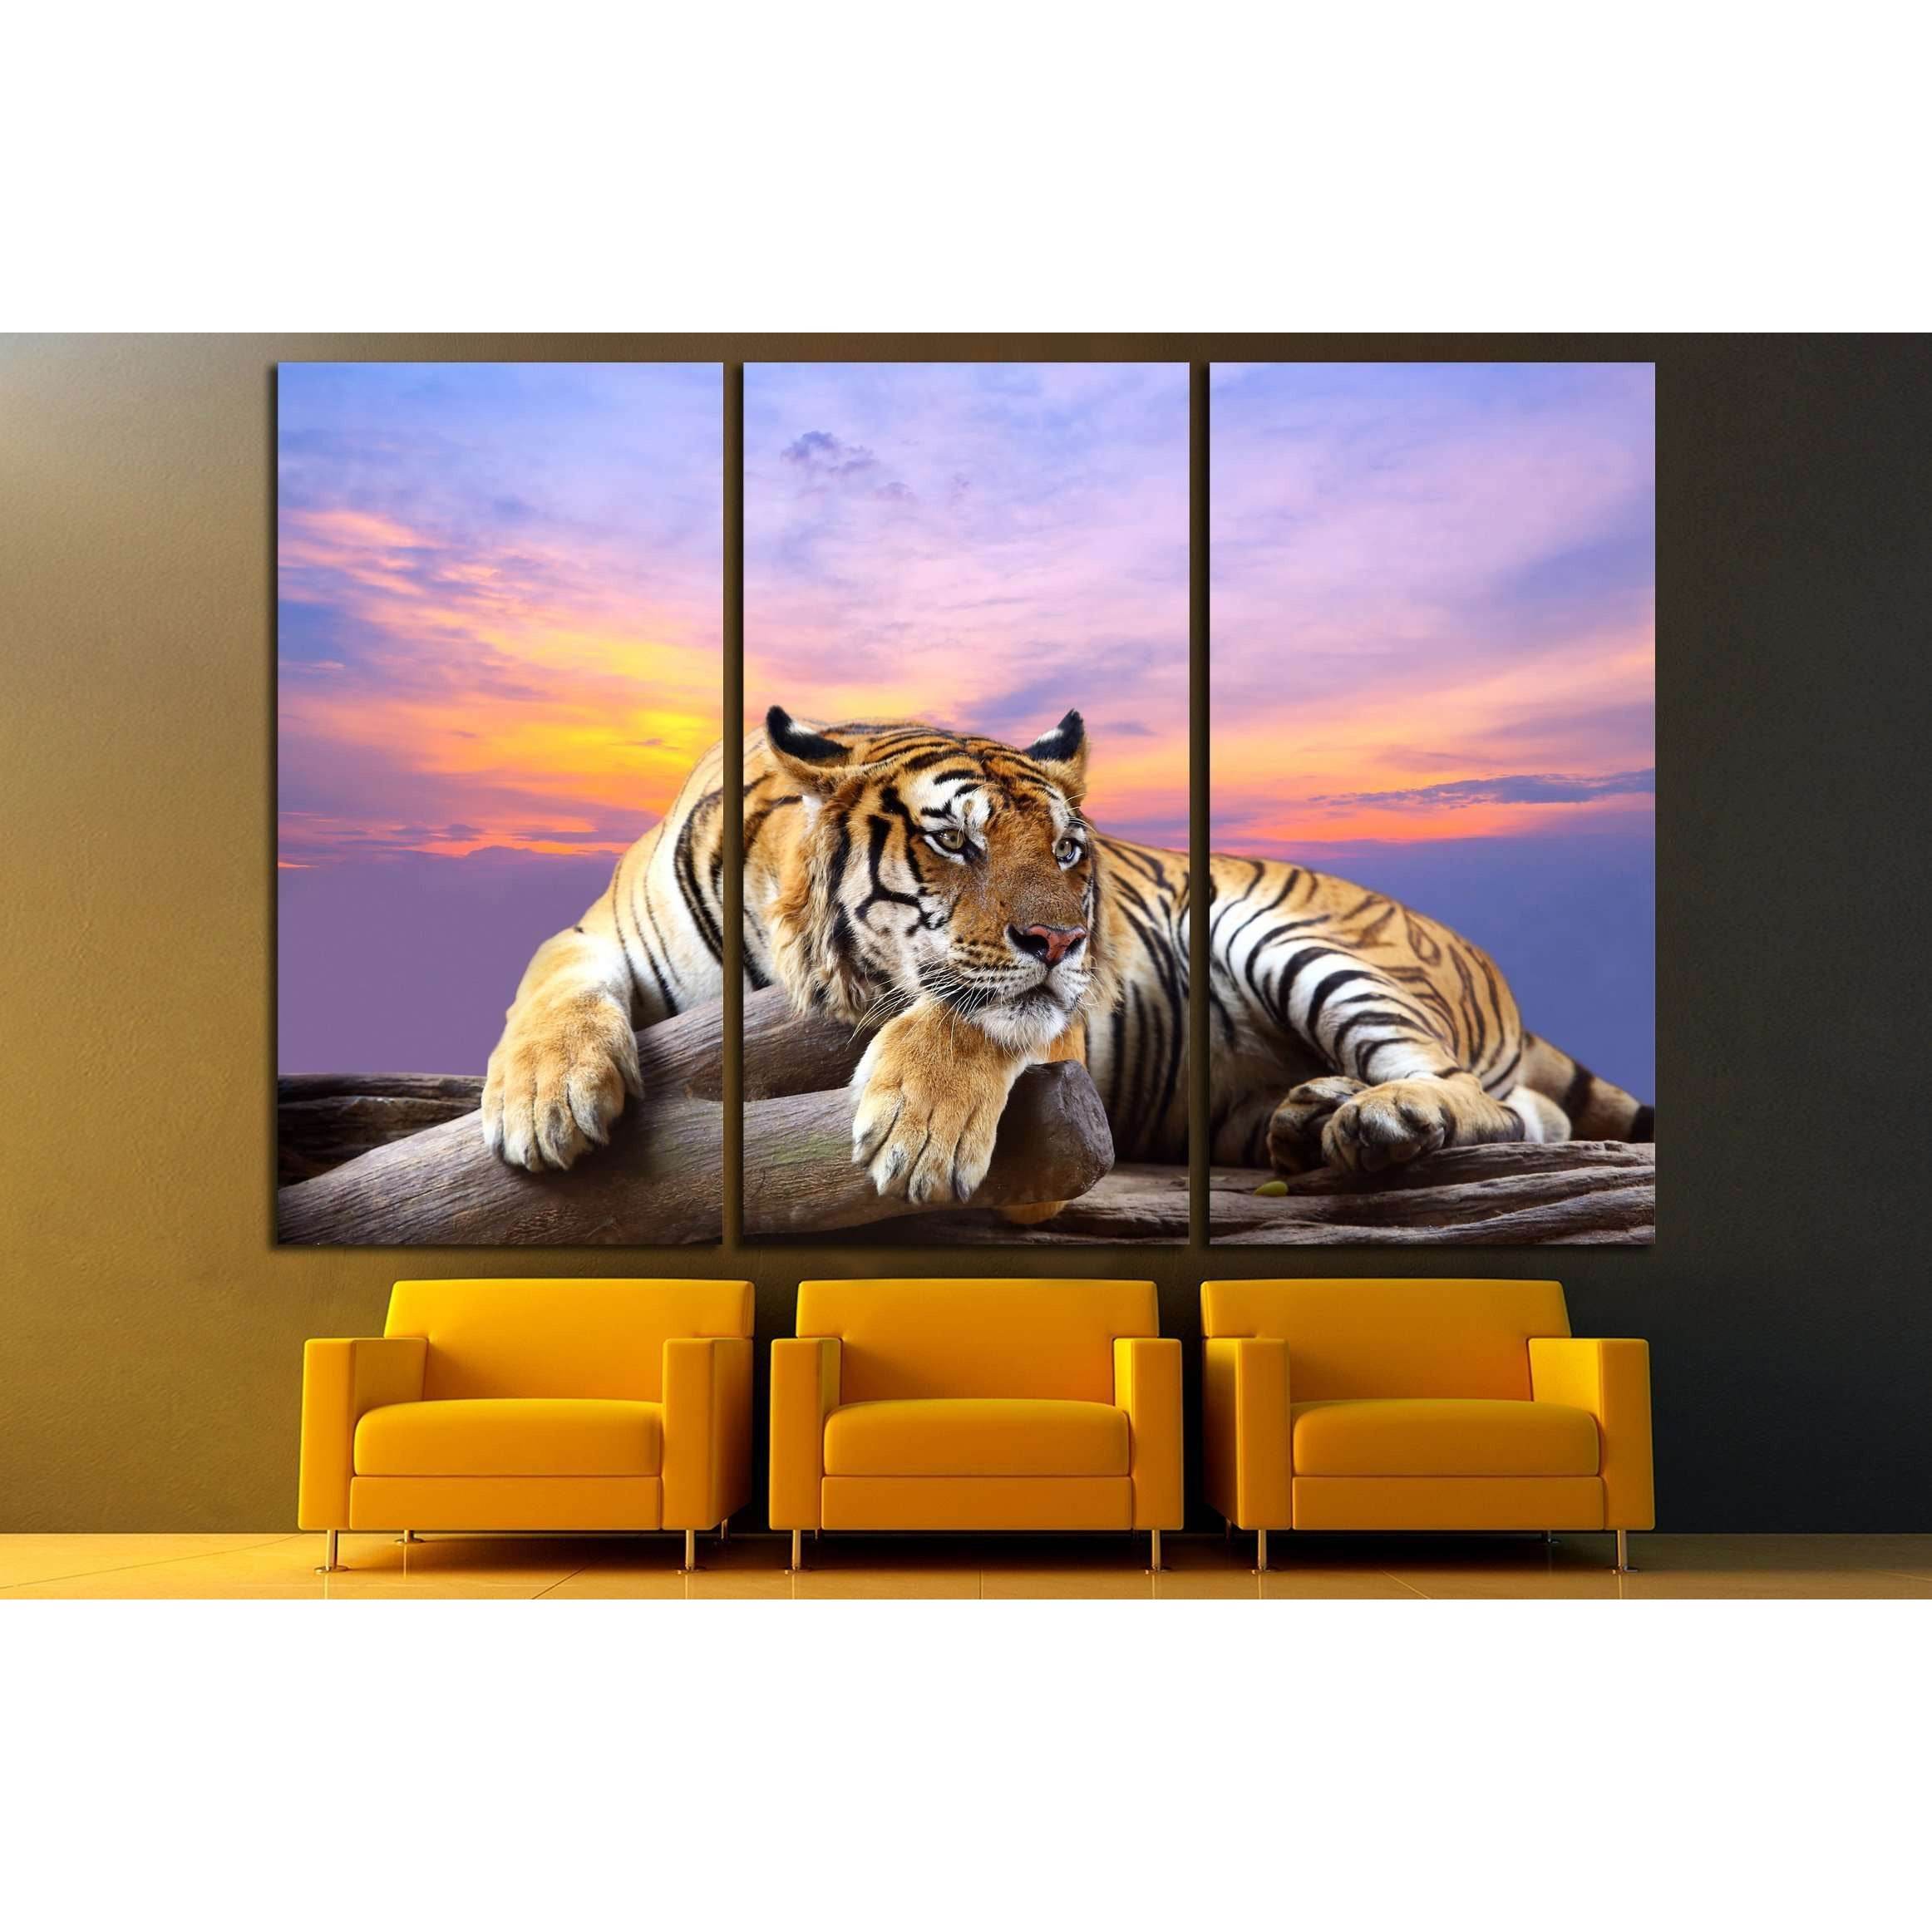 Tiger looking something on the rock with beautiful sky at sunset time №2793 Ready to Hang Canvas Print